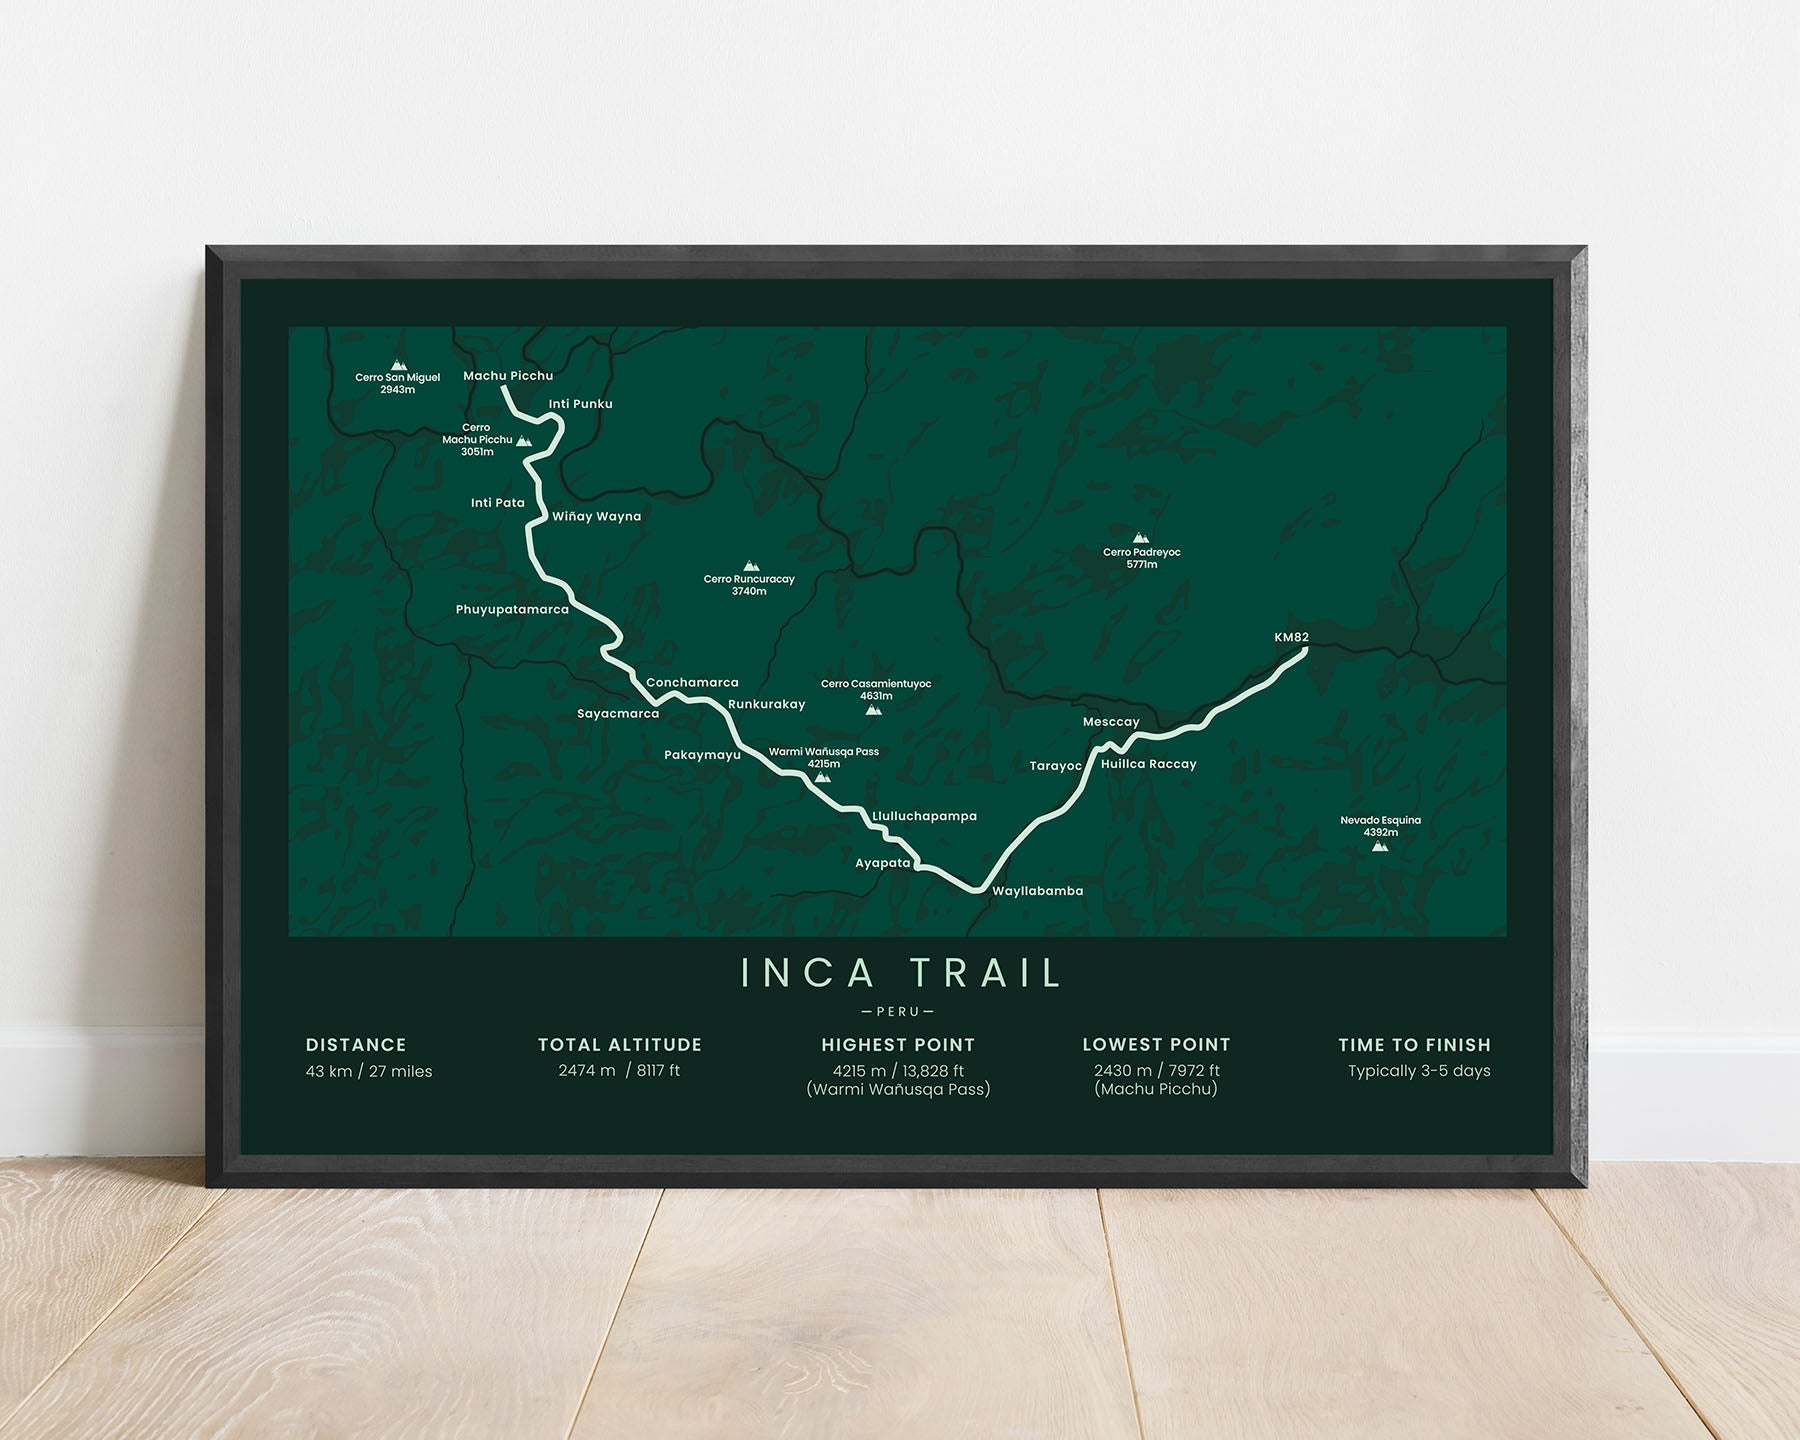 Inca trail (Peru) trail wall map with green background